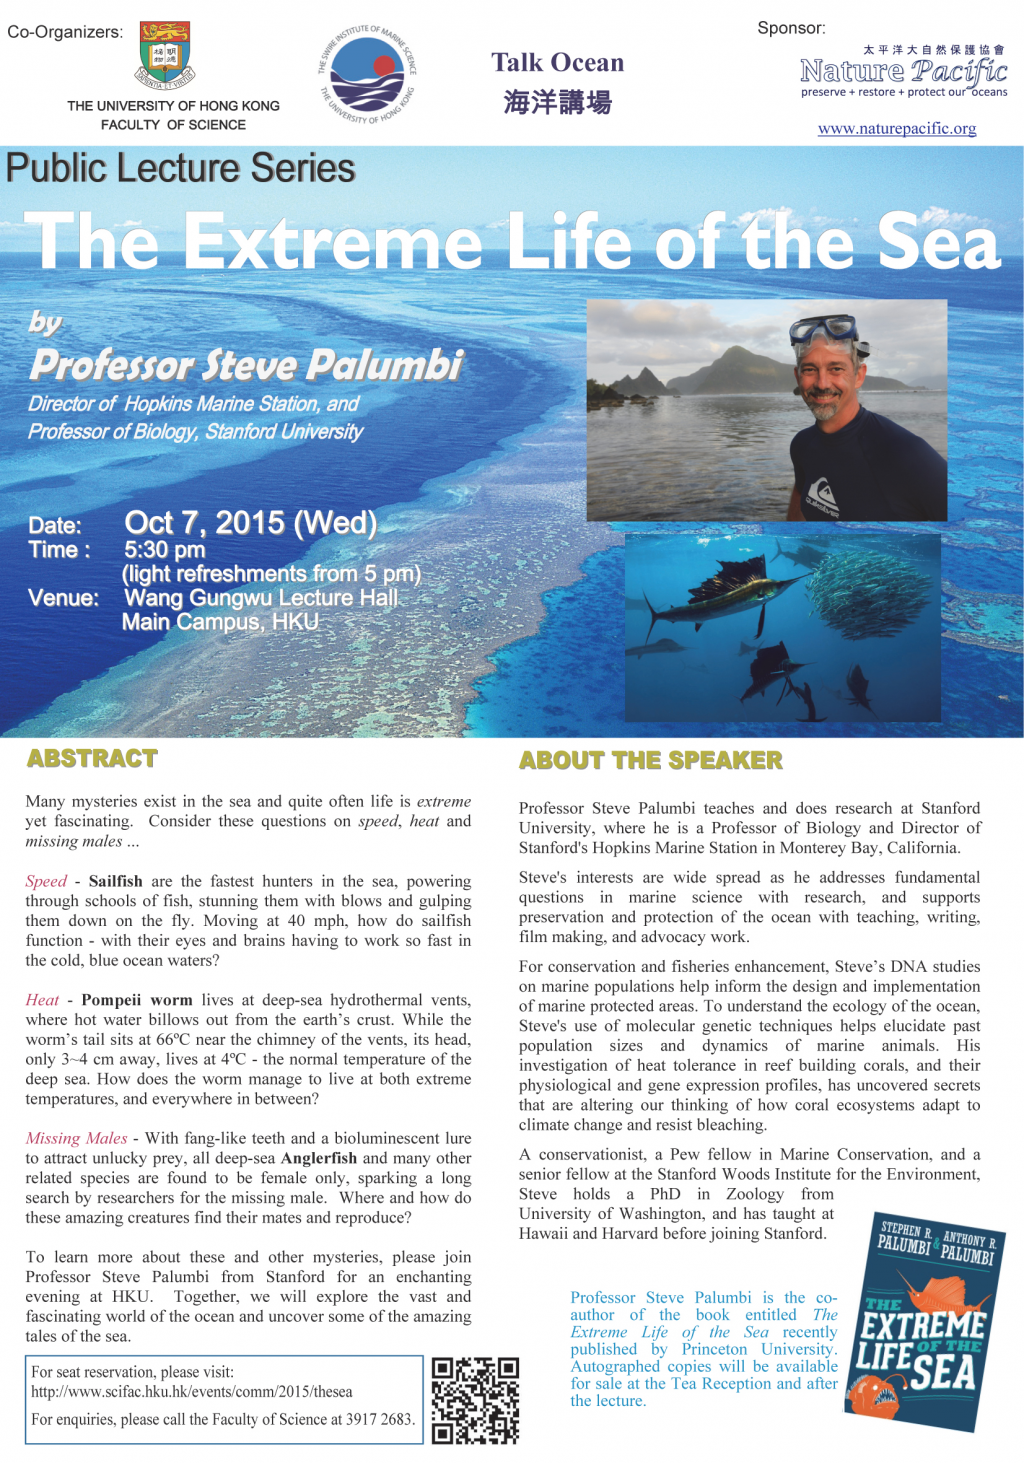 Public Lecture: The Extreme Life of the Sea